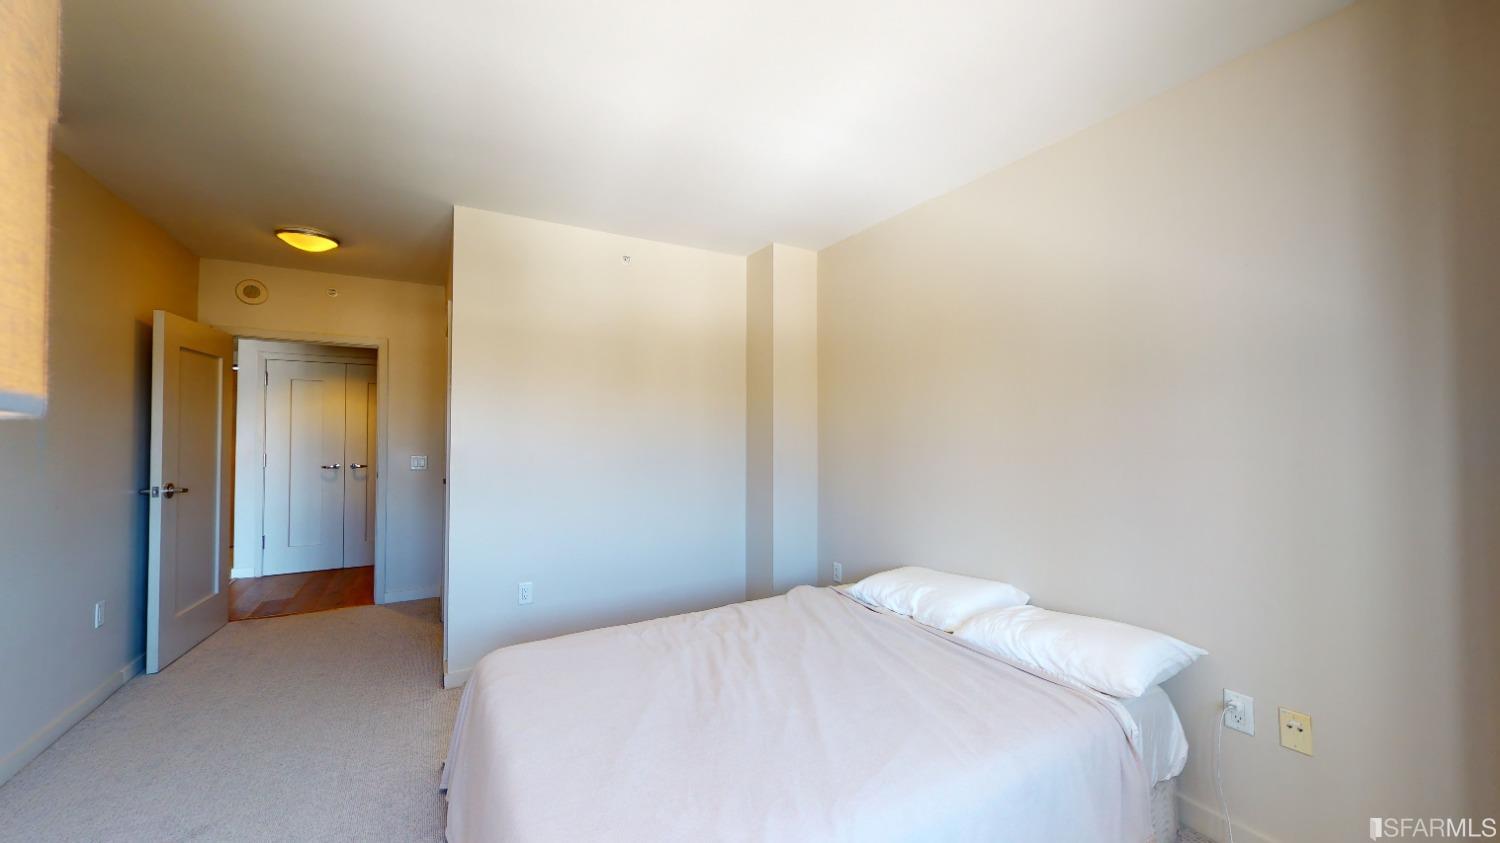 15826 Septo St #B, Los Angeles, CA 91343 1 Bedroom Apartment for  $1,300/month - Zumper